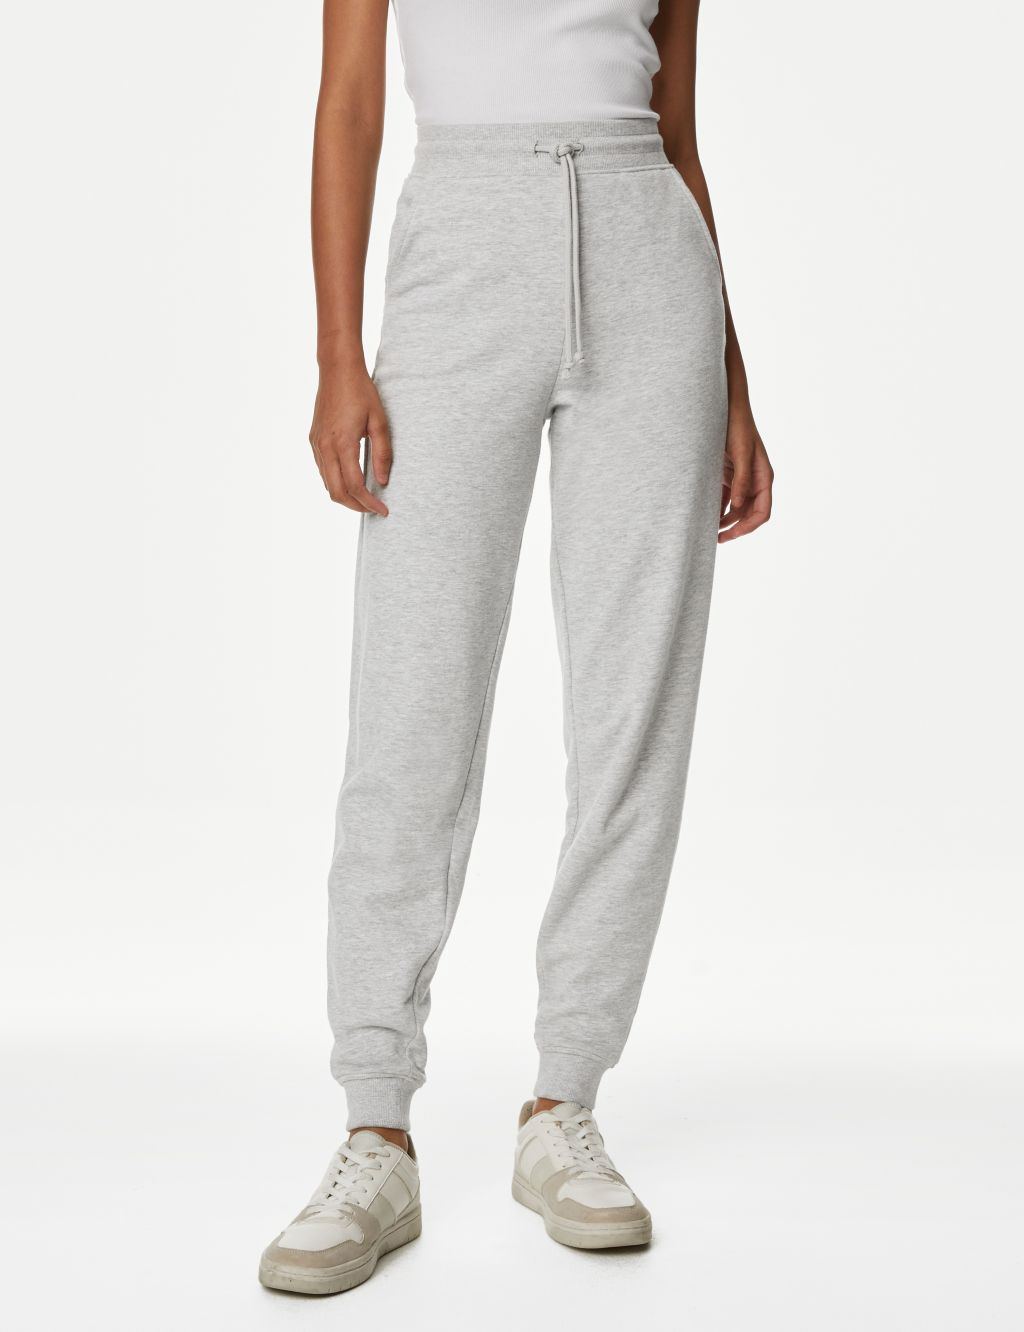 The Cotton Rich Cuffed Joggers image 3